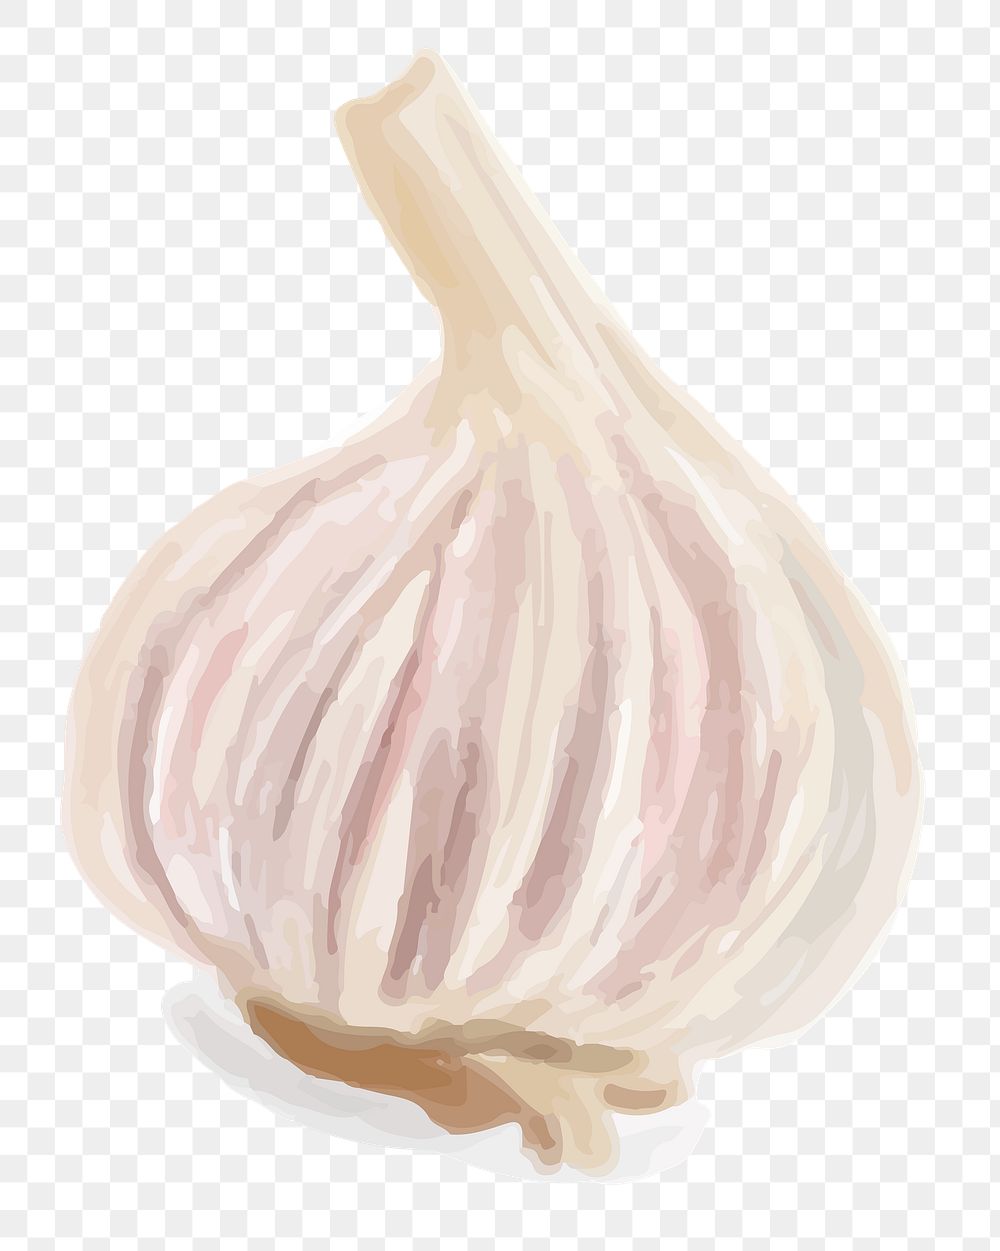 Watercolor white garlic png sticker hand drawn